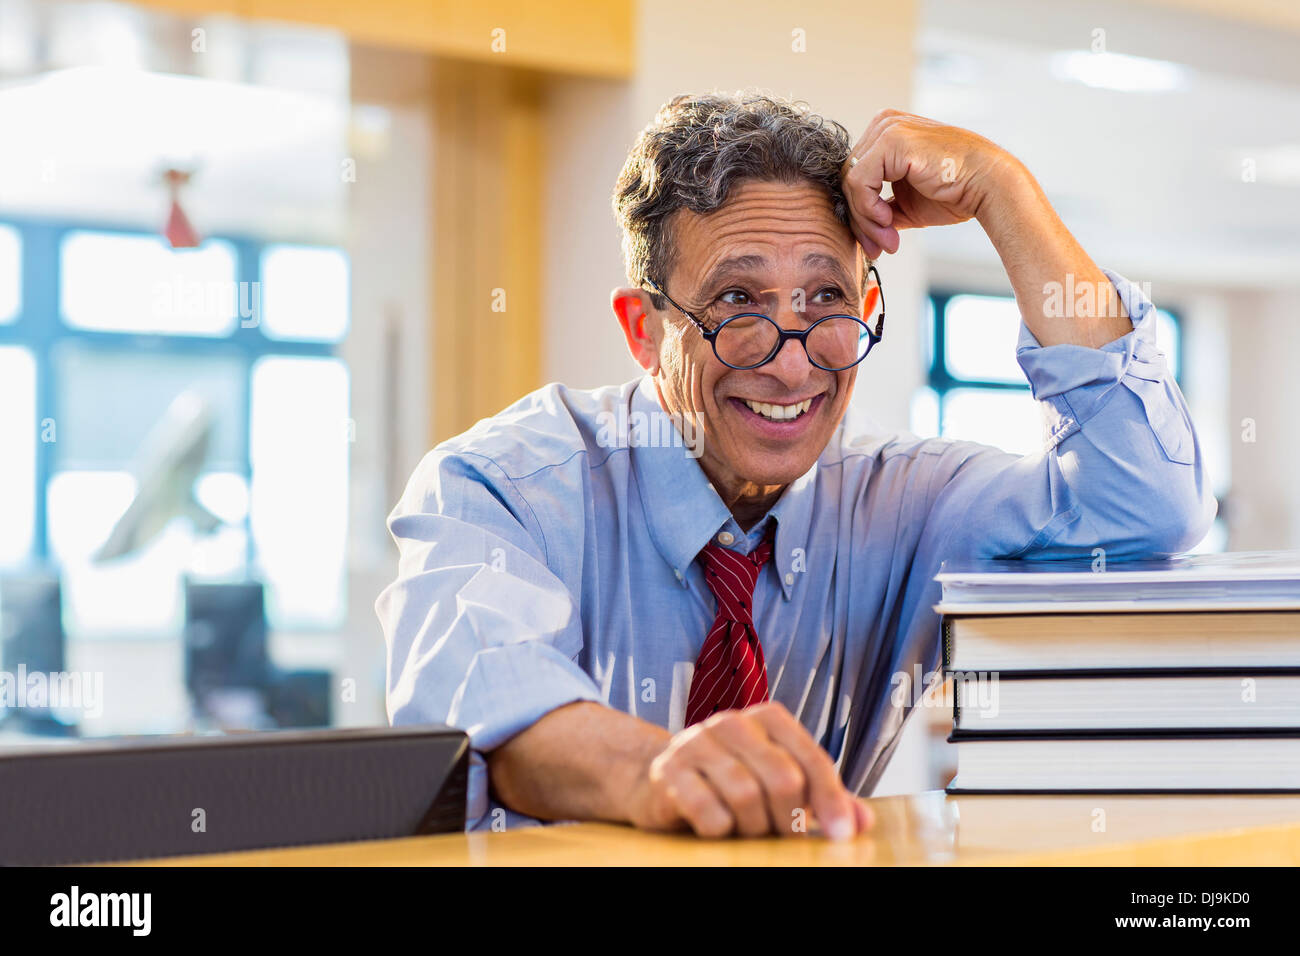 Senior man smiling in library Banque D'Images